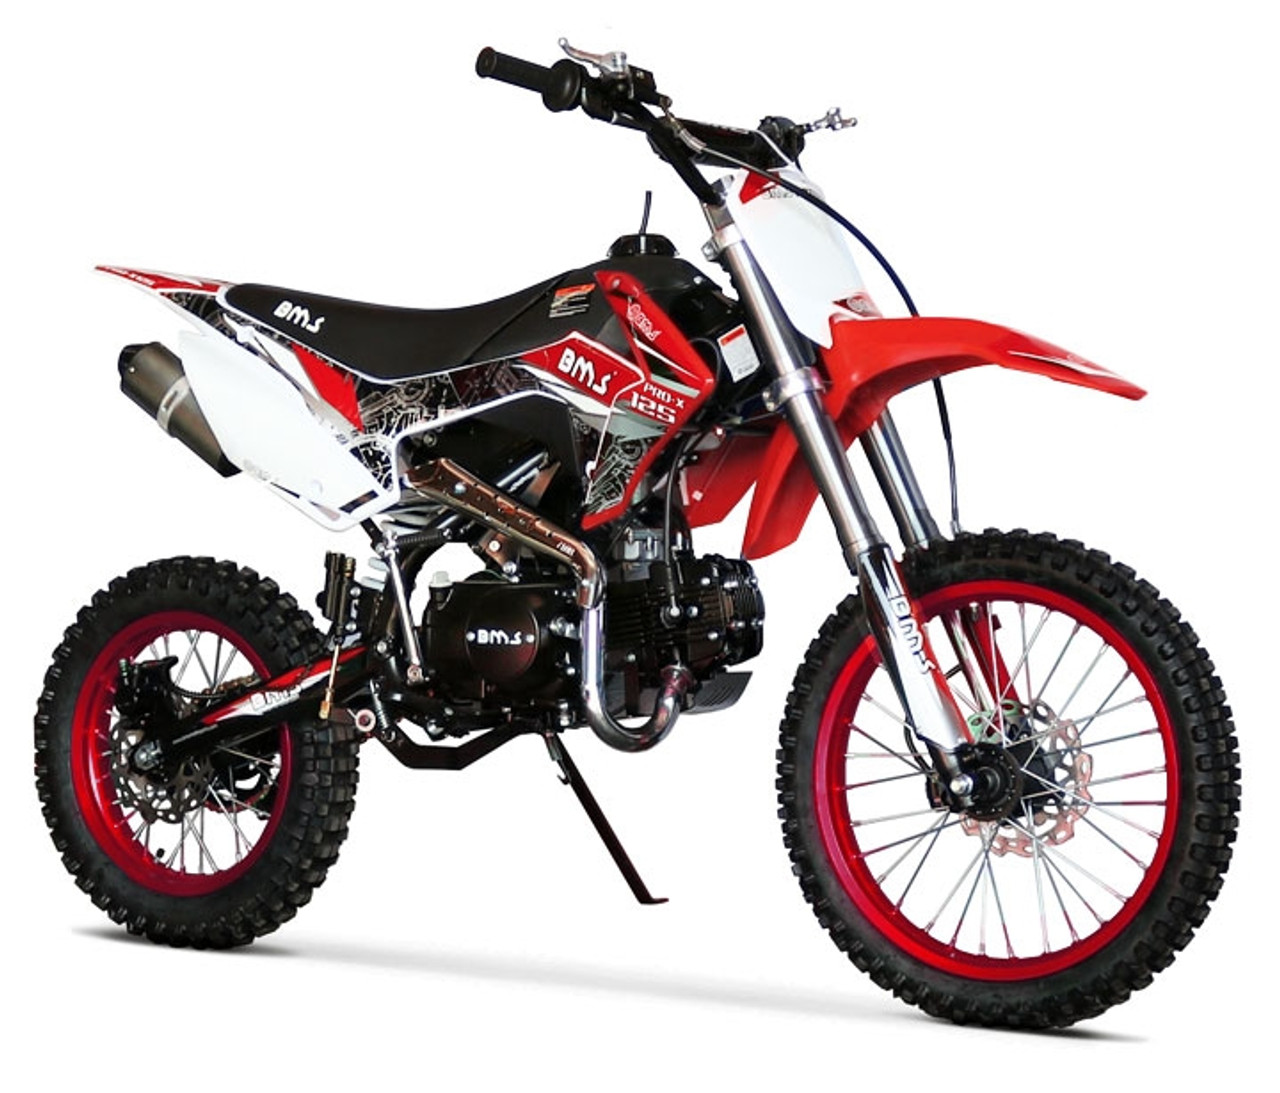 Buy New BMS Pro-X 125 Dirt Bike, Available in crate for online sale.